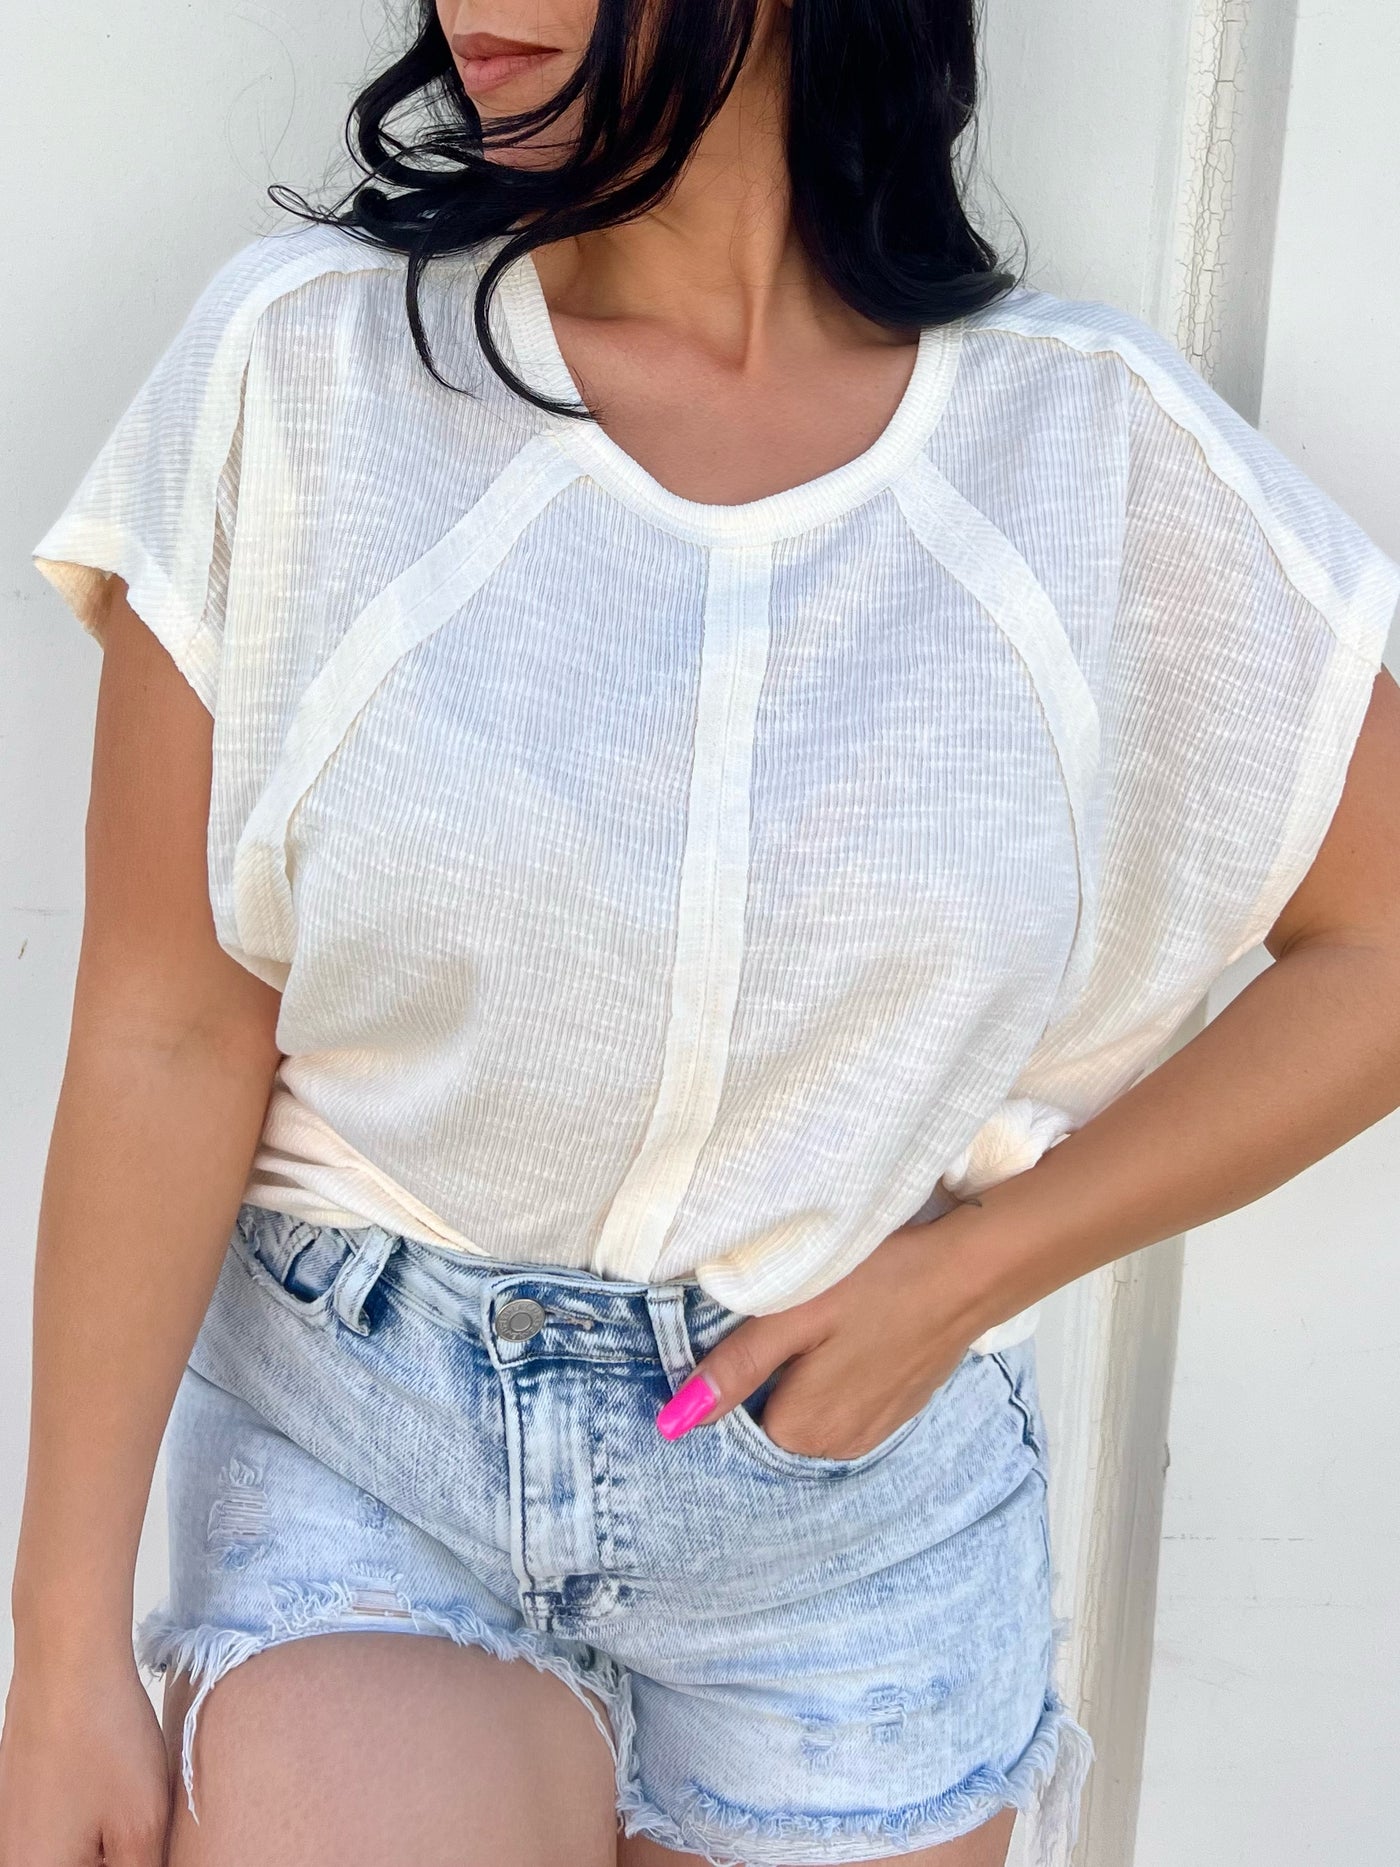 Your Average Gal - Short Sleeve Two-Tone Rib Knit Open Seam Top